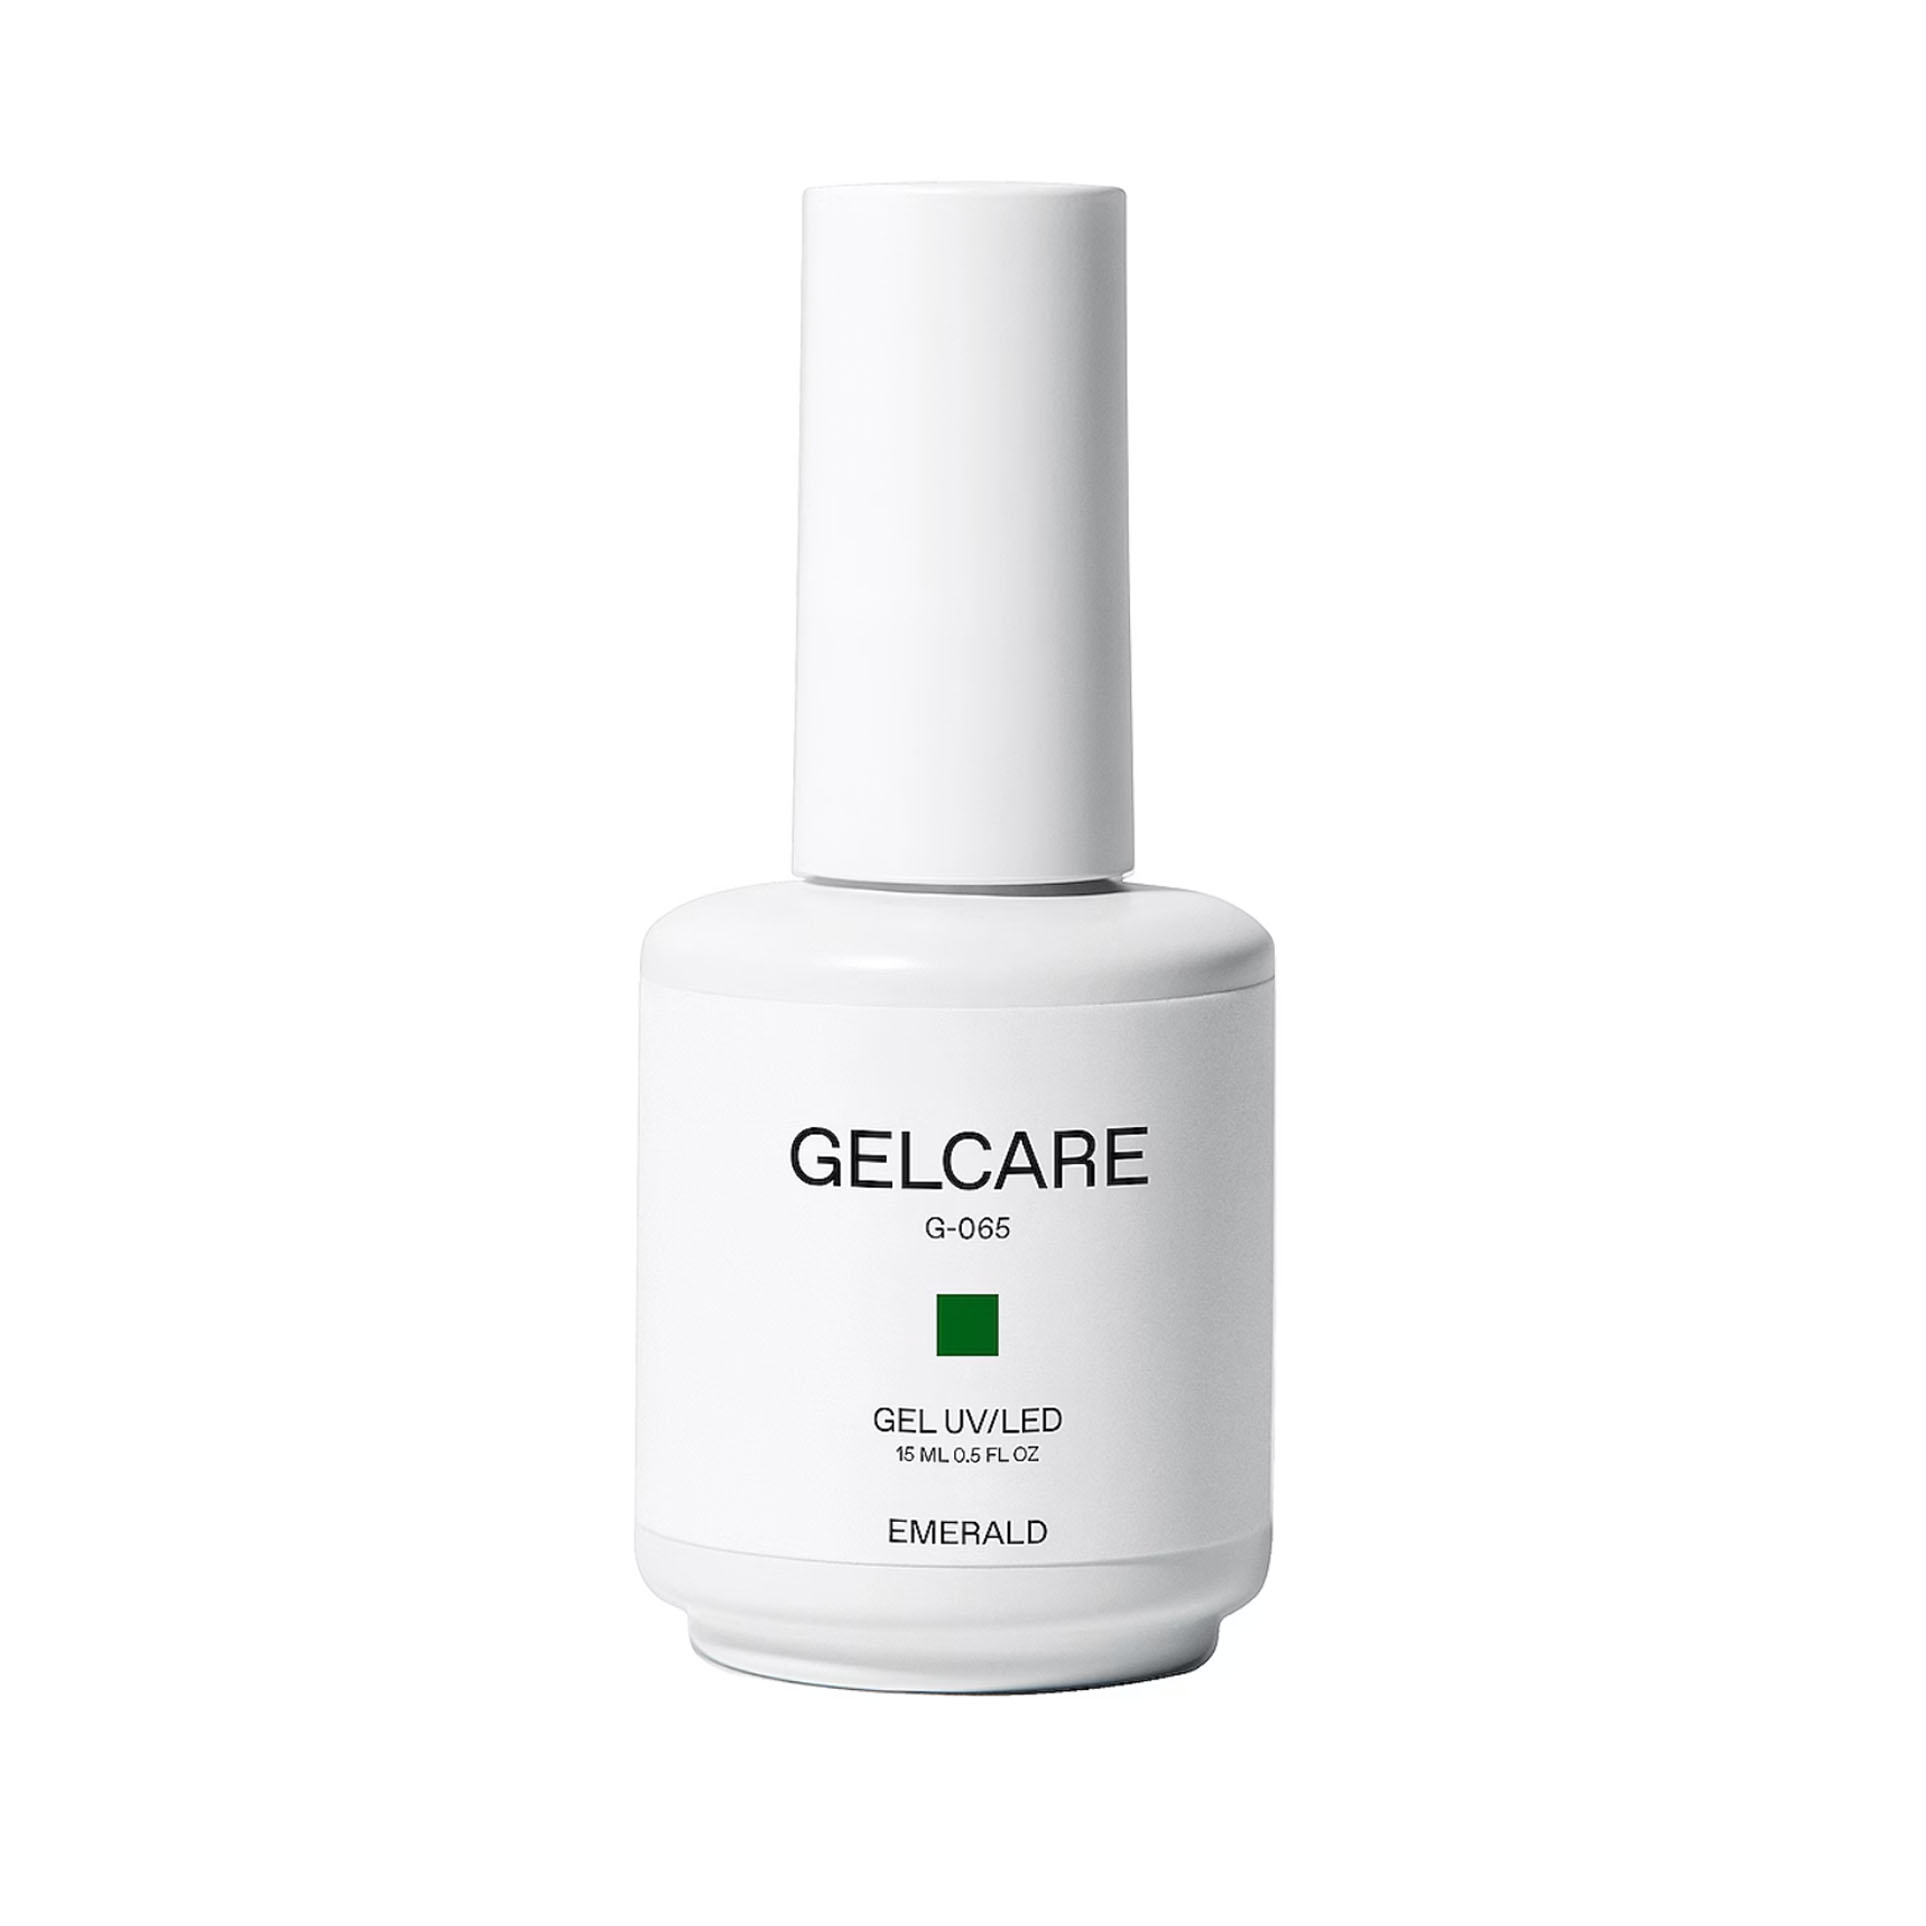 Gelcare Emerald Gel Nail Polish in a white bottle